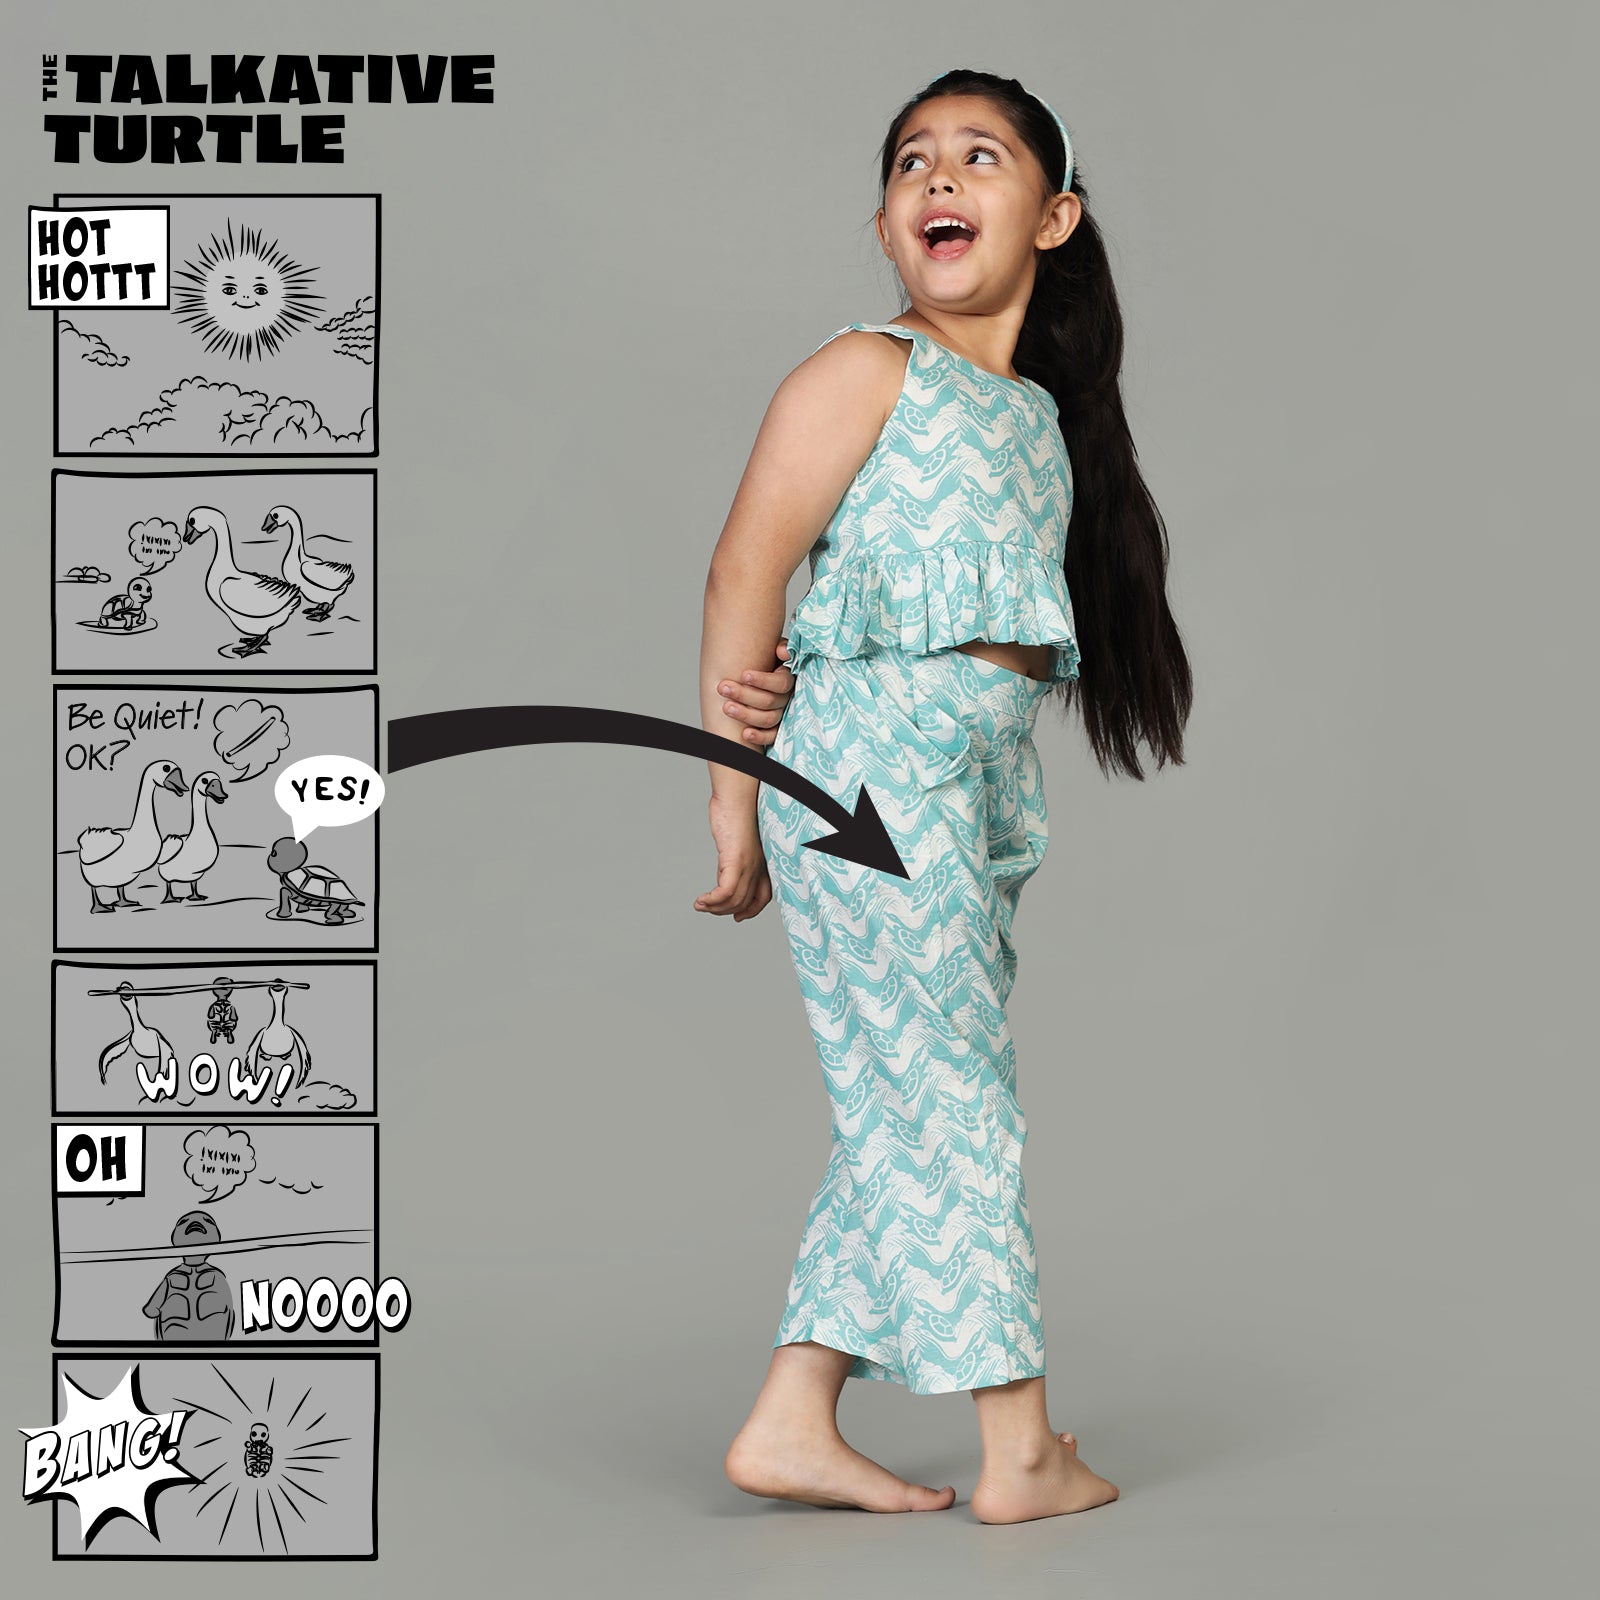 Cotton Crop Top & Pants For Girls with The Talkative Turtle Print